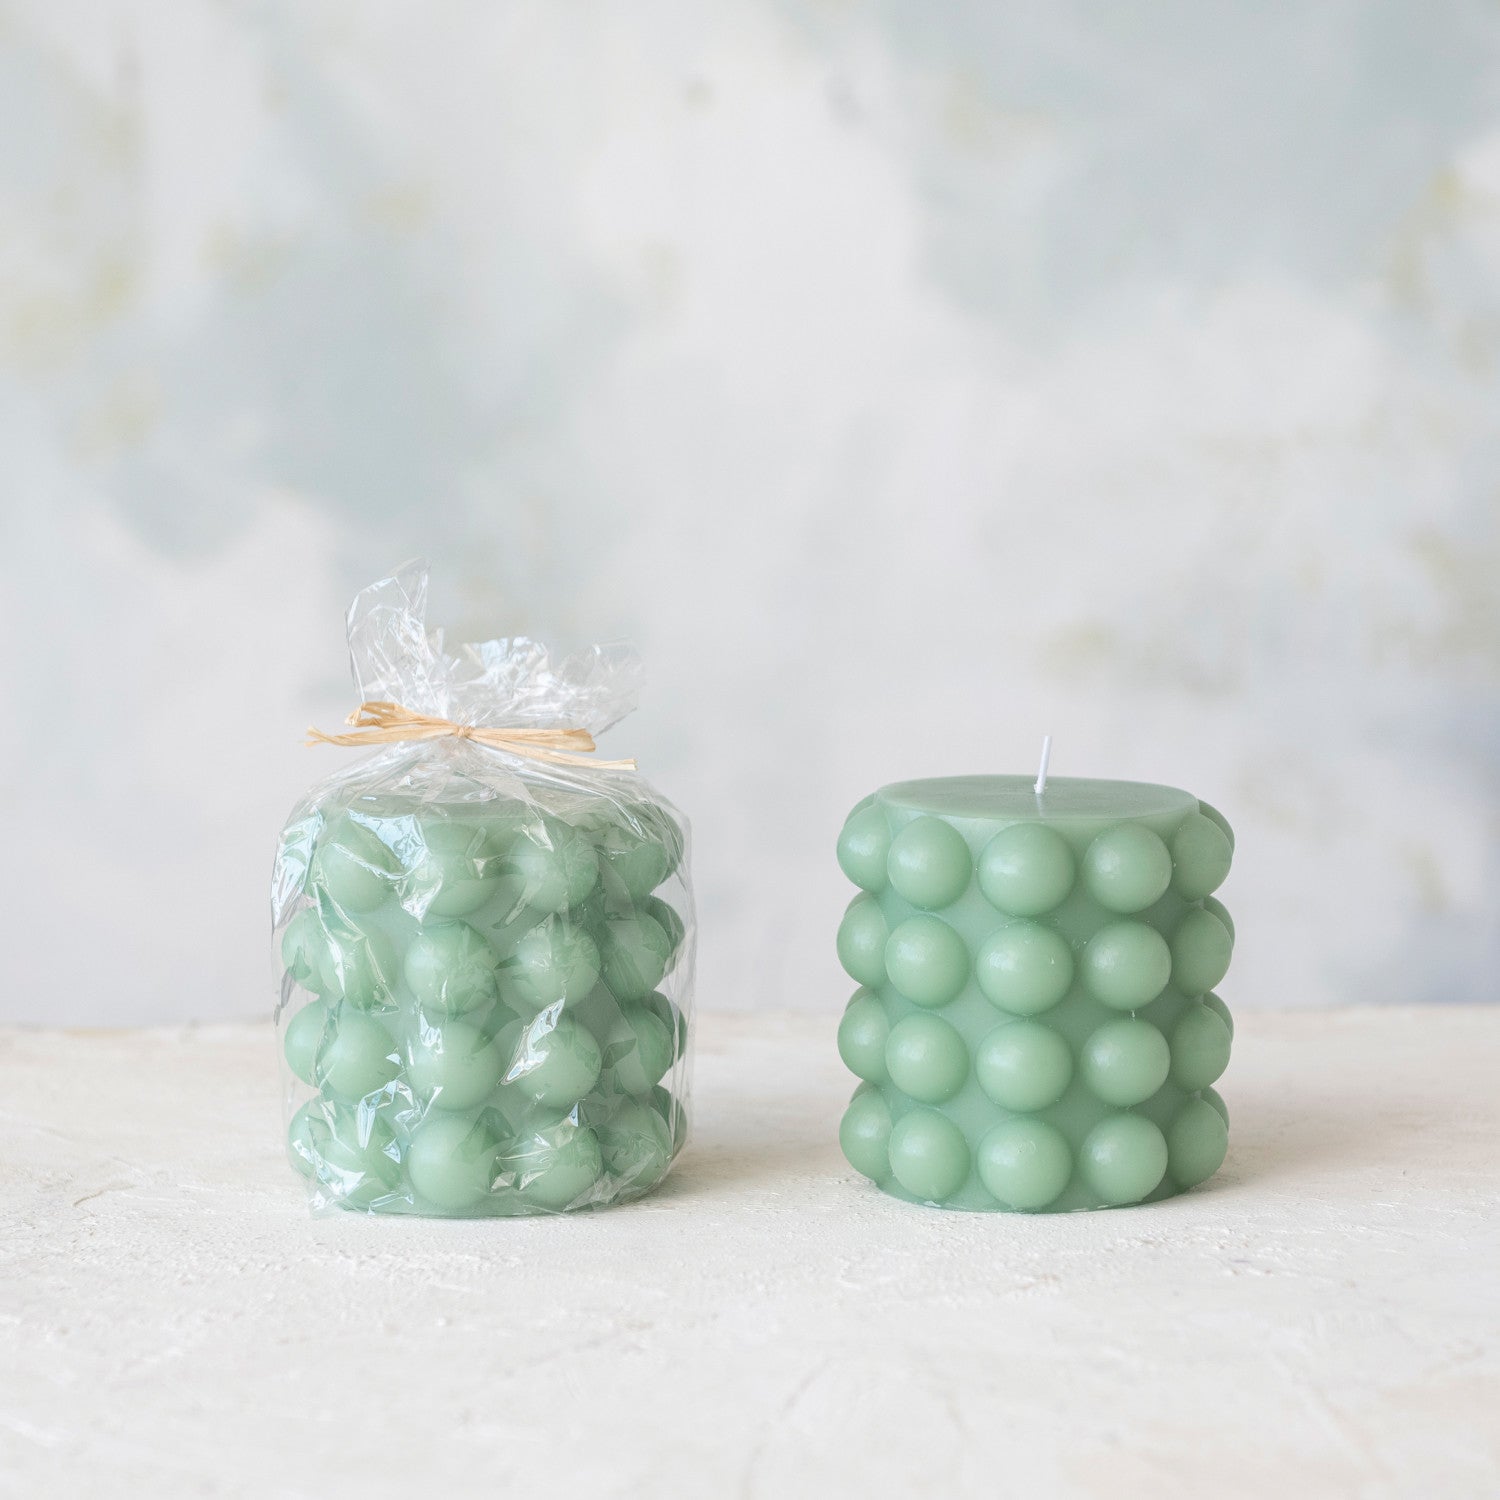 Unscented Hobnail Pillar Candle in Mint